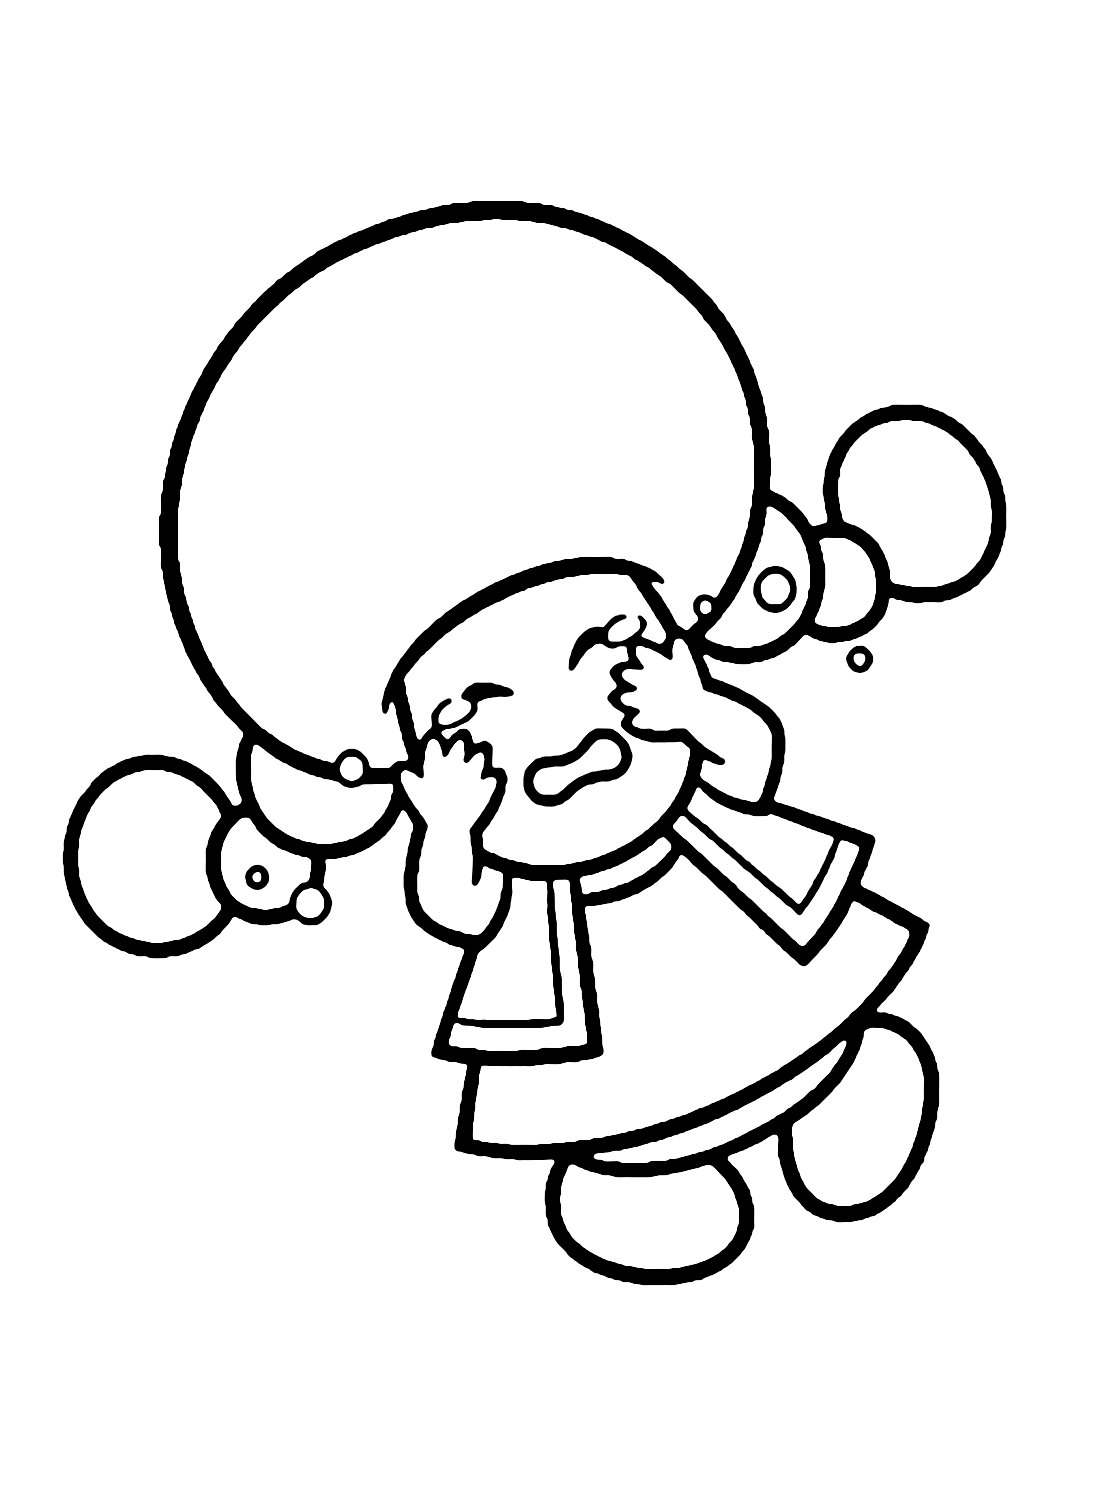 Crying Toadette Coloring Page